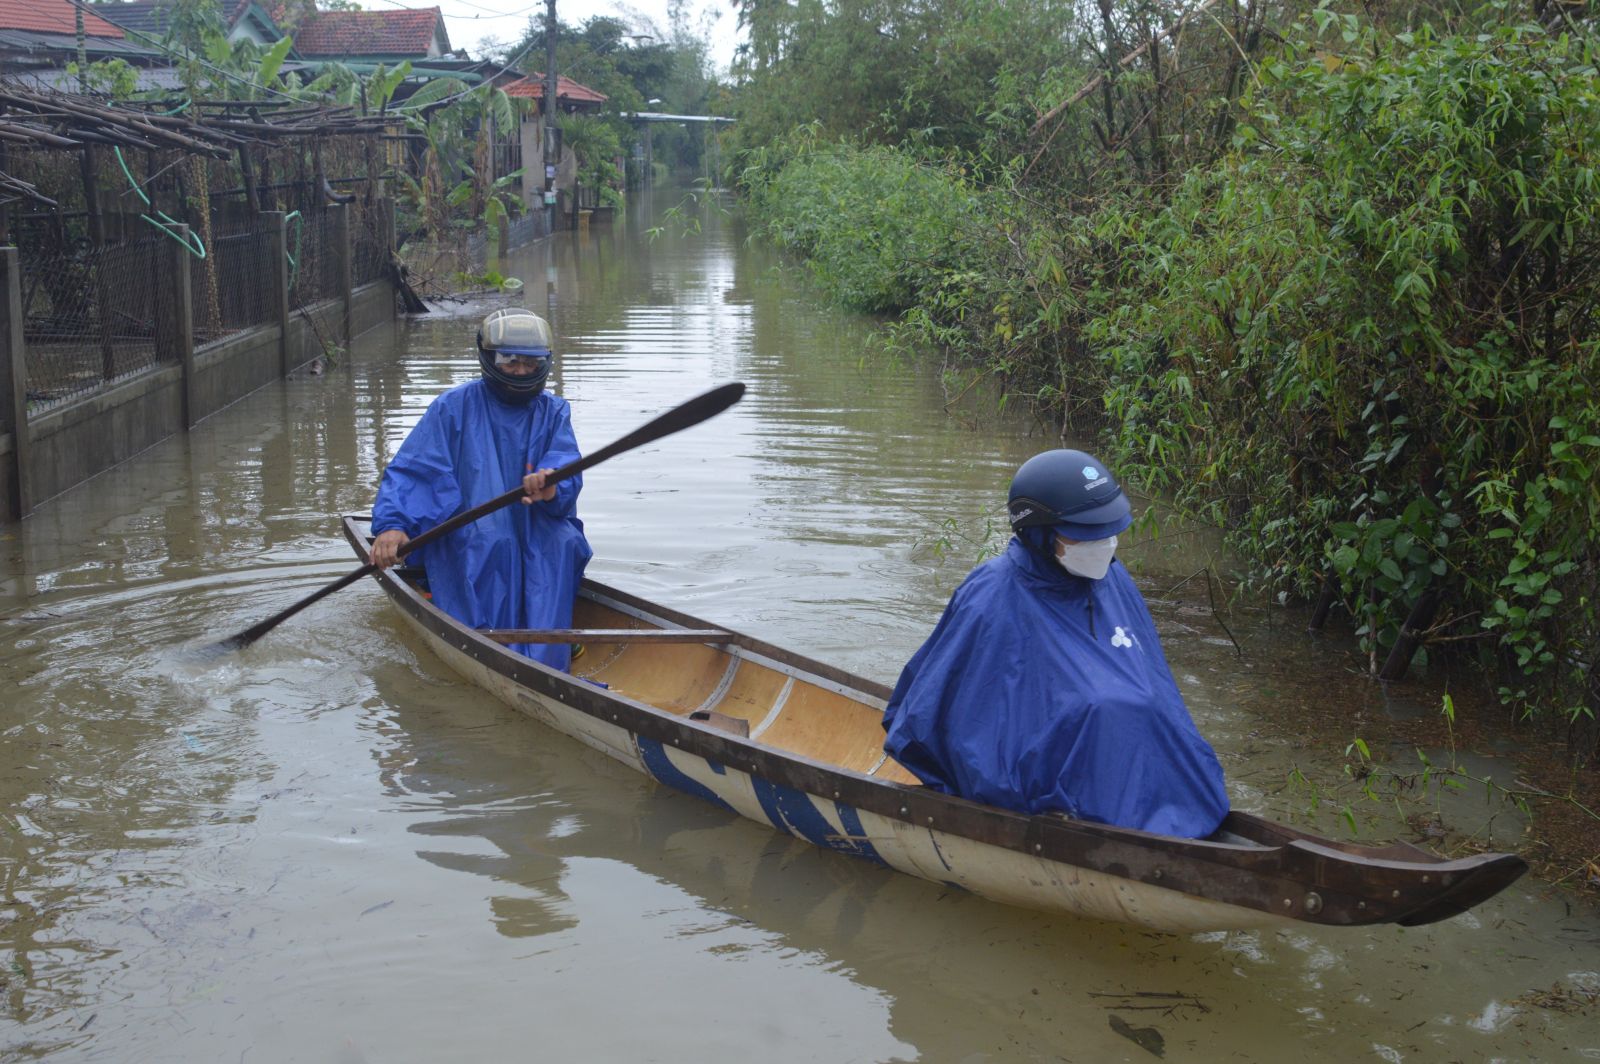 People in low-lying areas traveling by boat